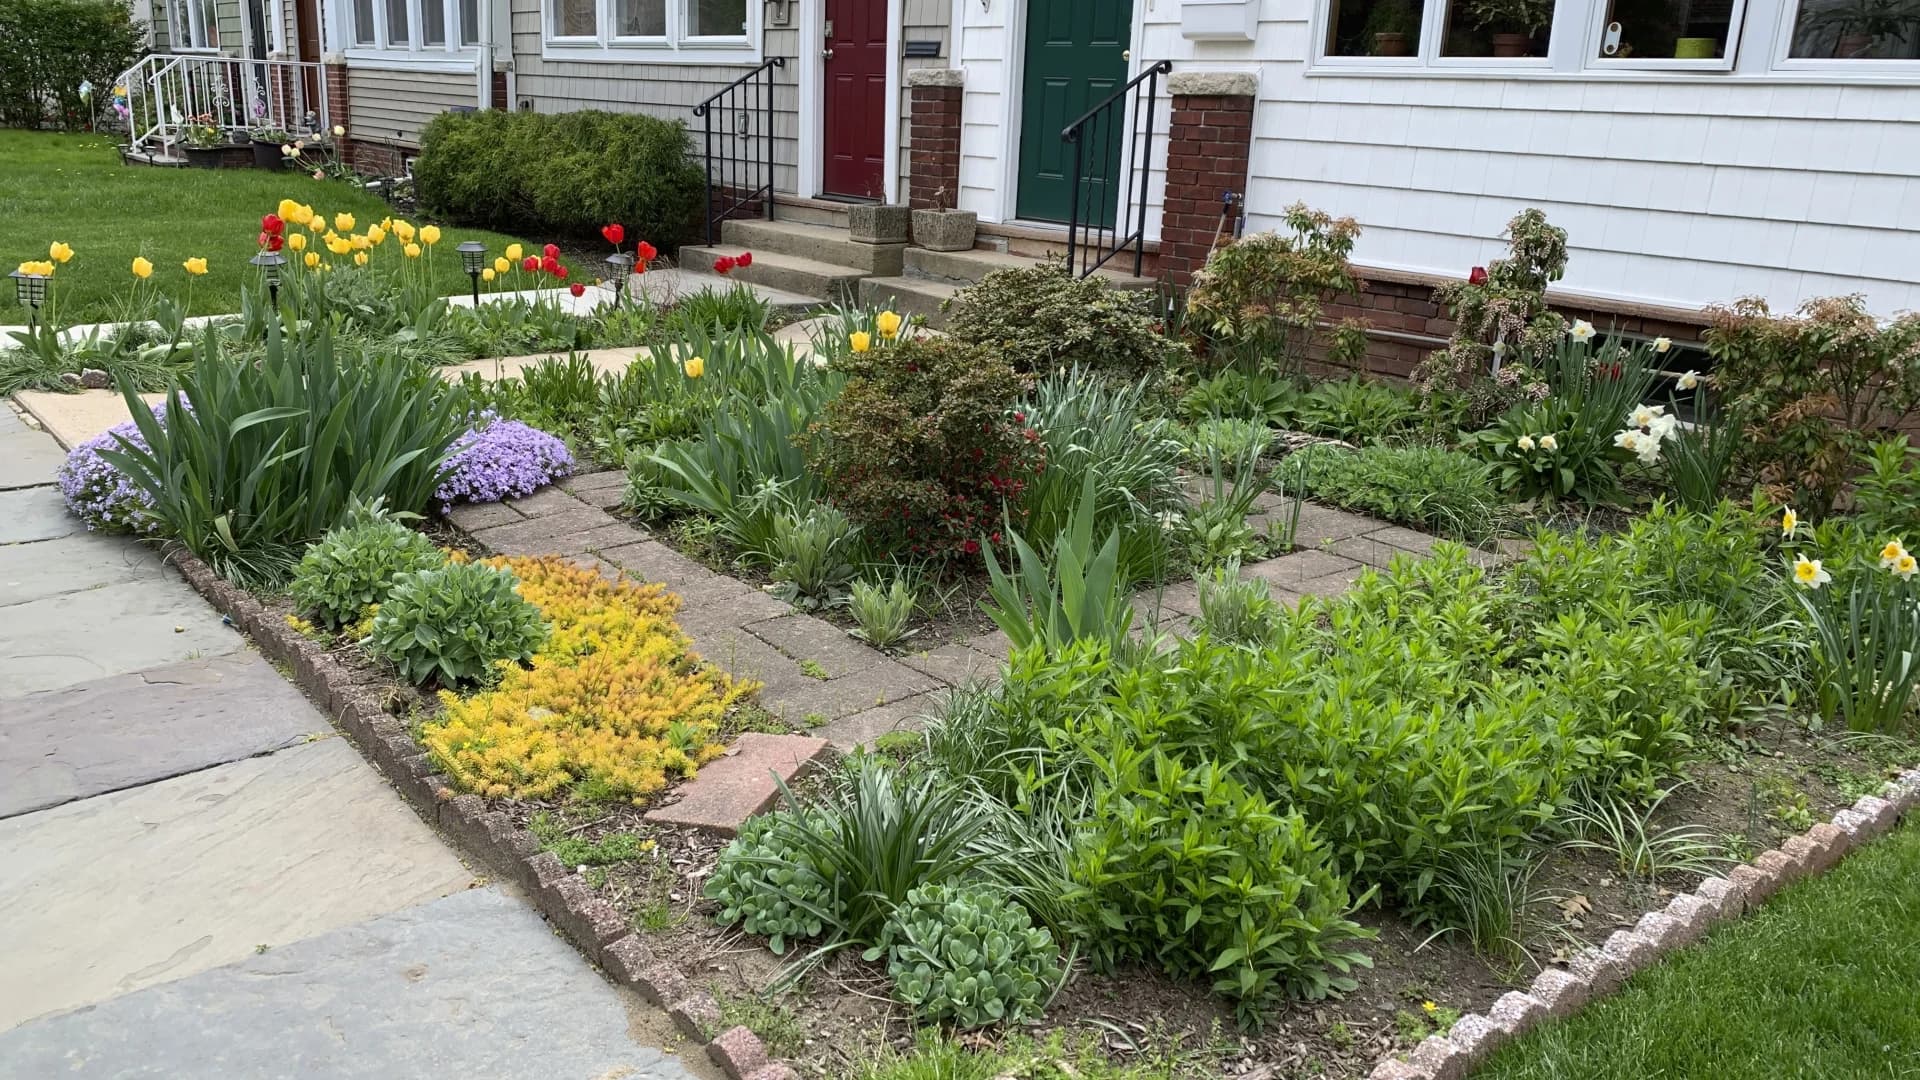 America's love affair with lawns is getting messy; How a New Yorker transformed her lawn to pollinator-friendly, native plants